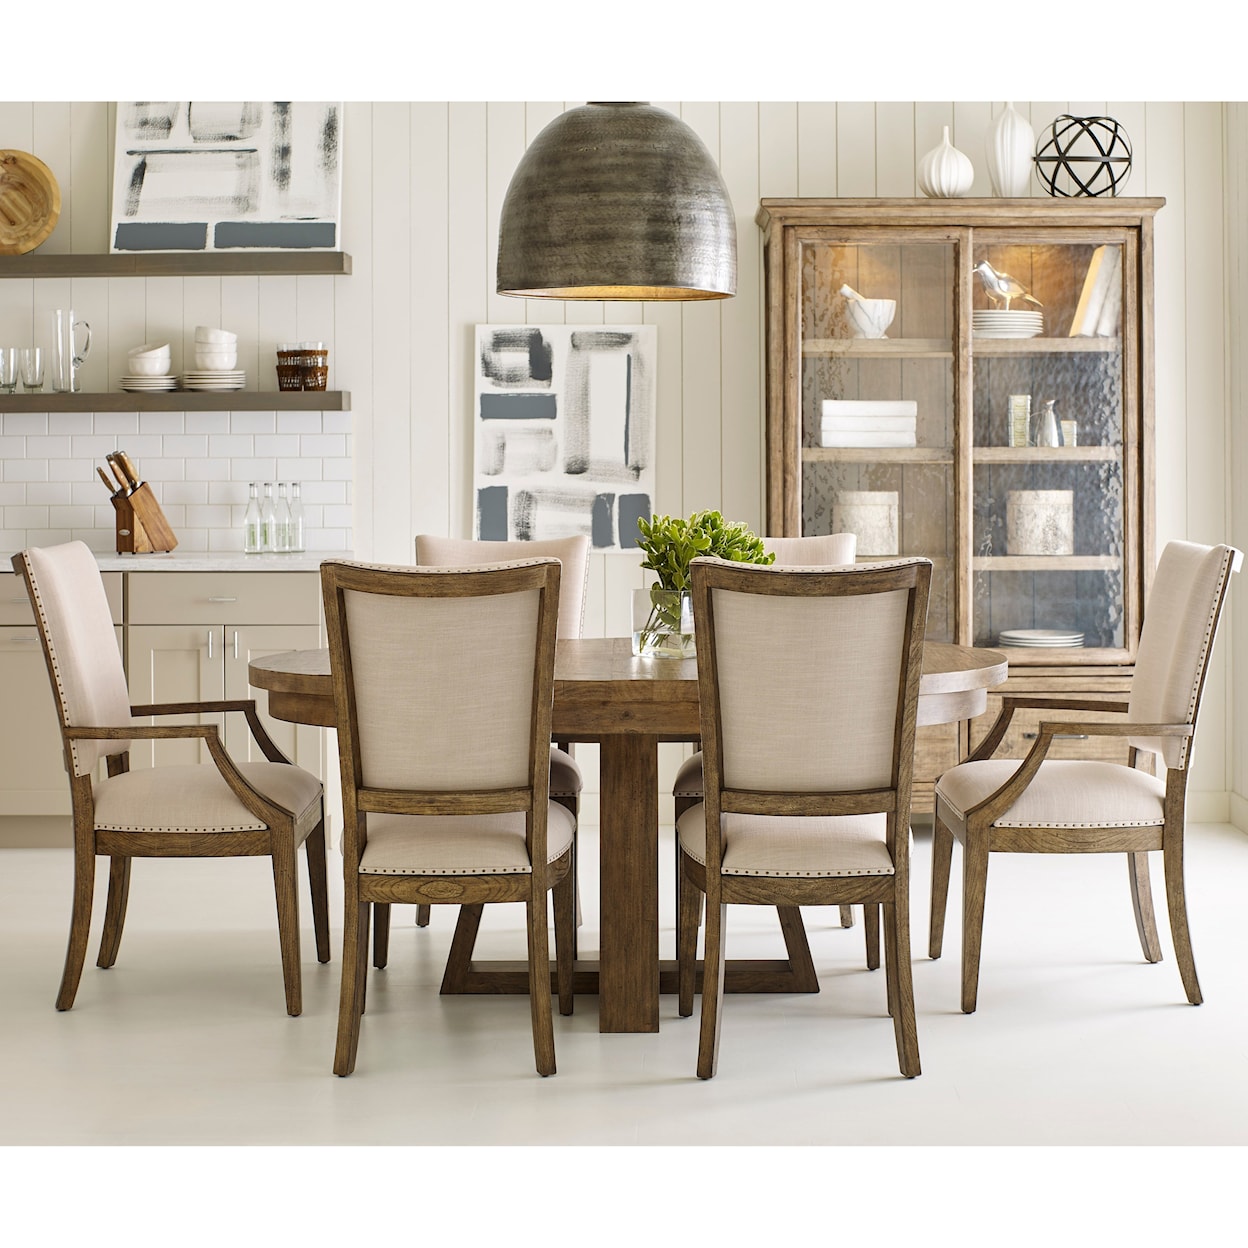 Kincaid Furniture Plank Road 7 Pc Dining Set w/ Button Table